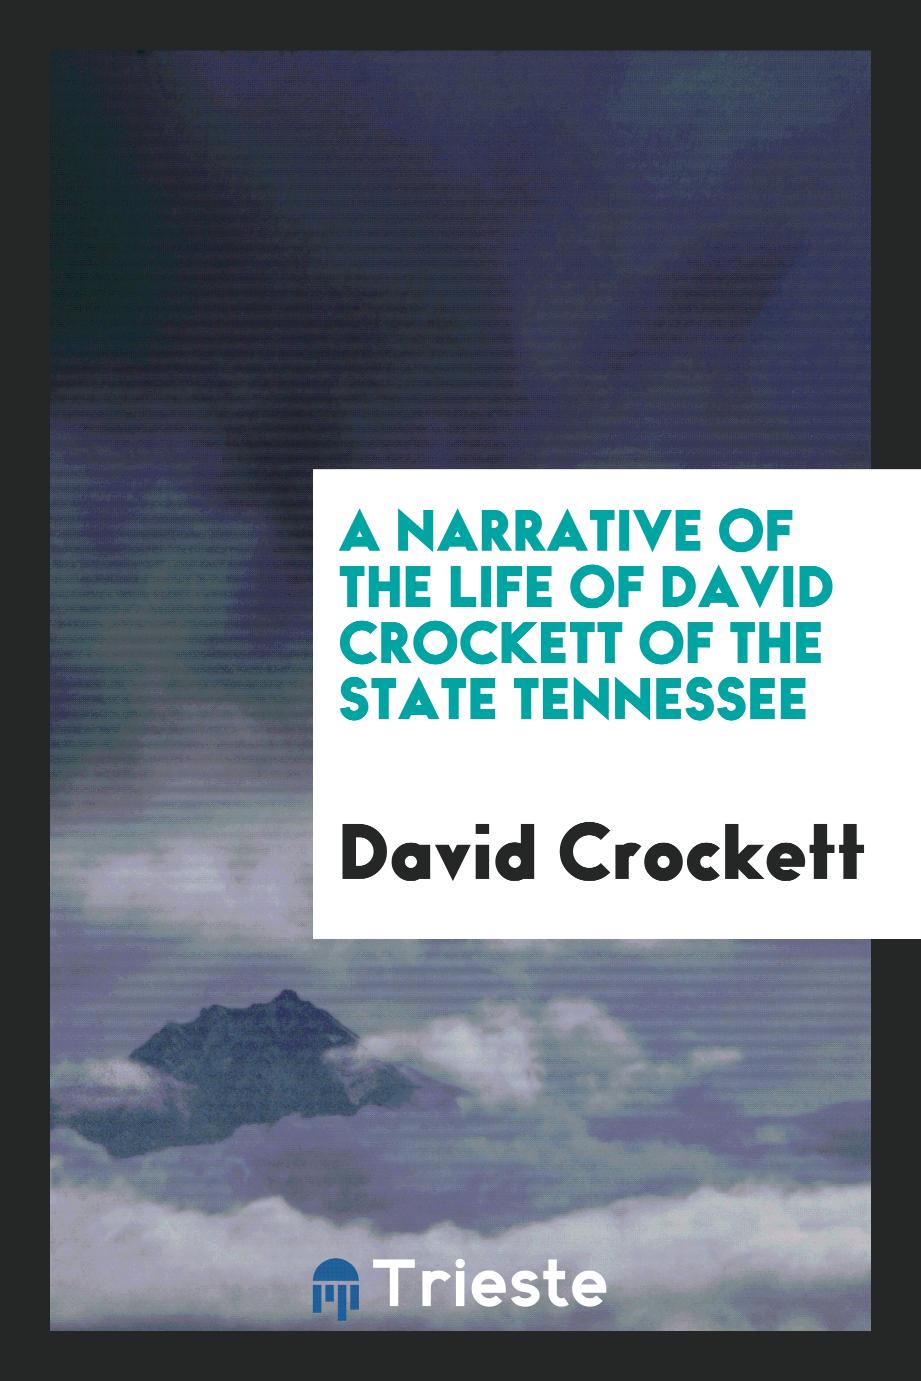 A narrative of the life of David Crockett of the state Tennessee